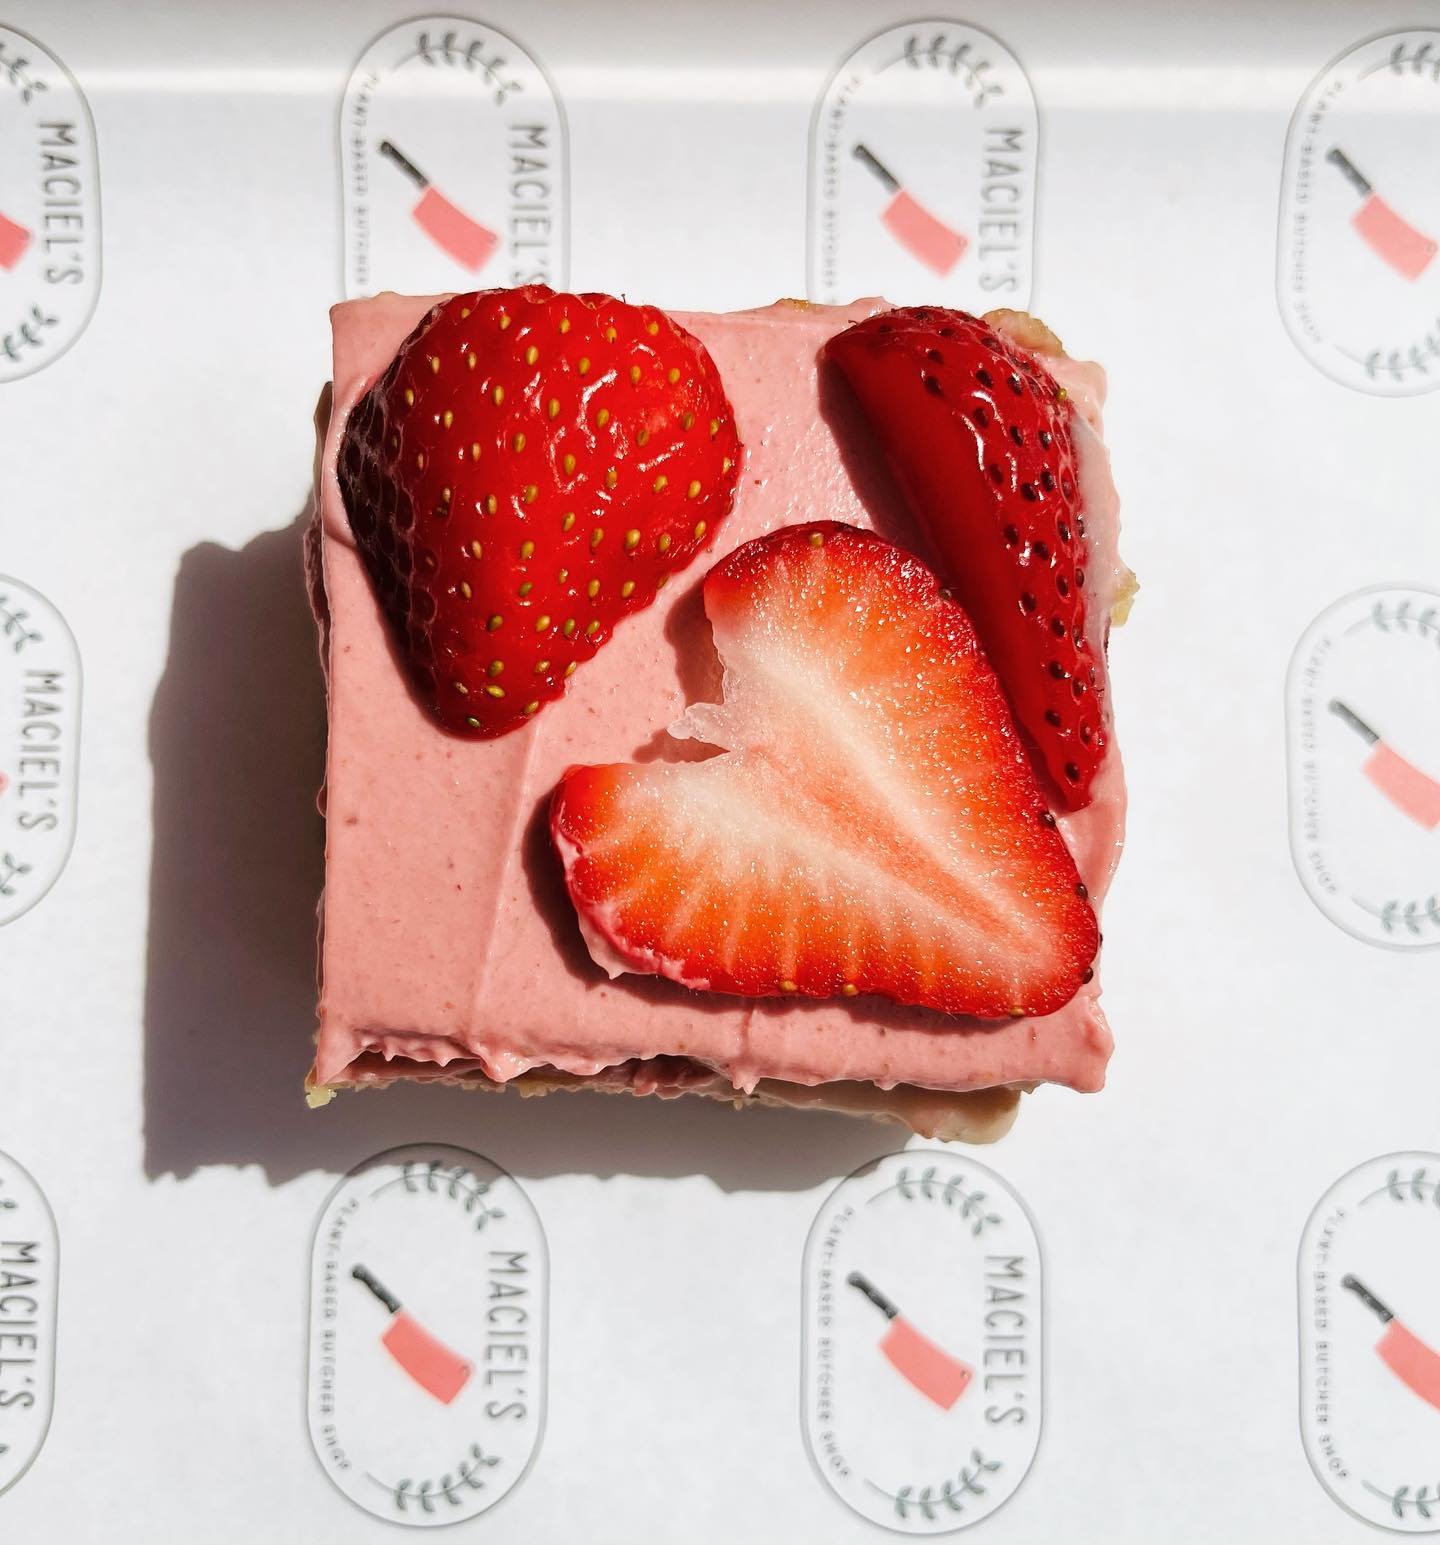 Mother&rsquo;s Day Special! The Strawberry Tres Leches was such a hit on Cinco de Mayo, we are doing another round for Mother&rsquo;s Day! 🍓🍓🍓 Sunday only and a limited amount. 

#tresleches #strawberrytresleches #mothersday #vegandessert #plantba